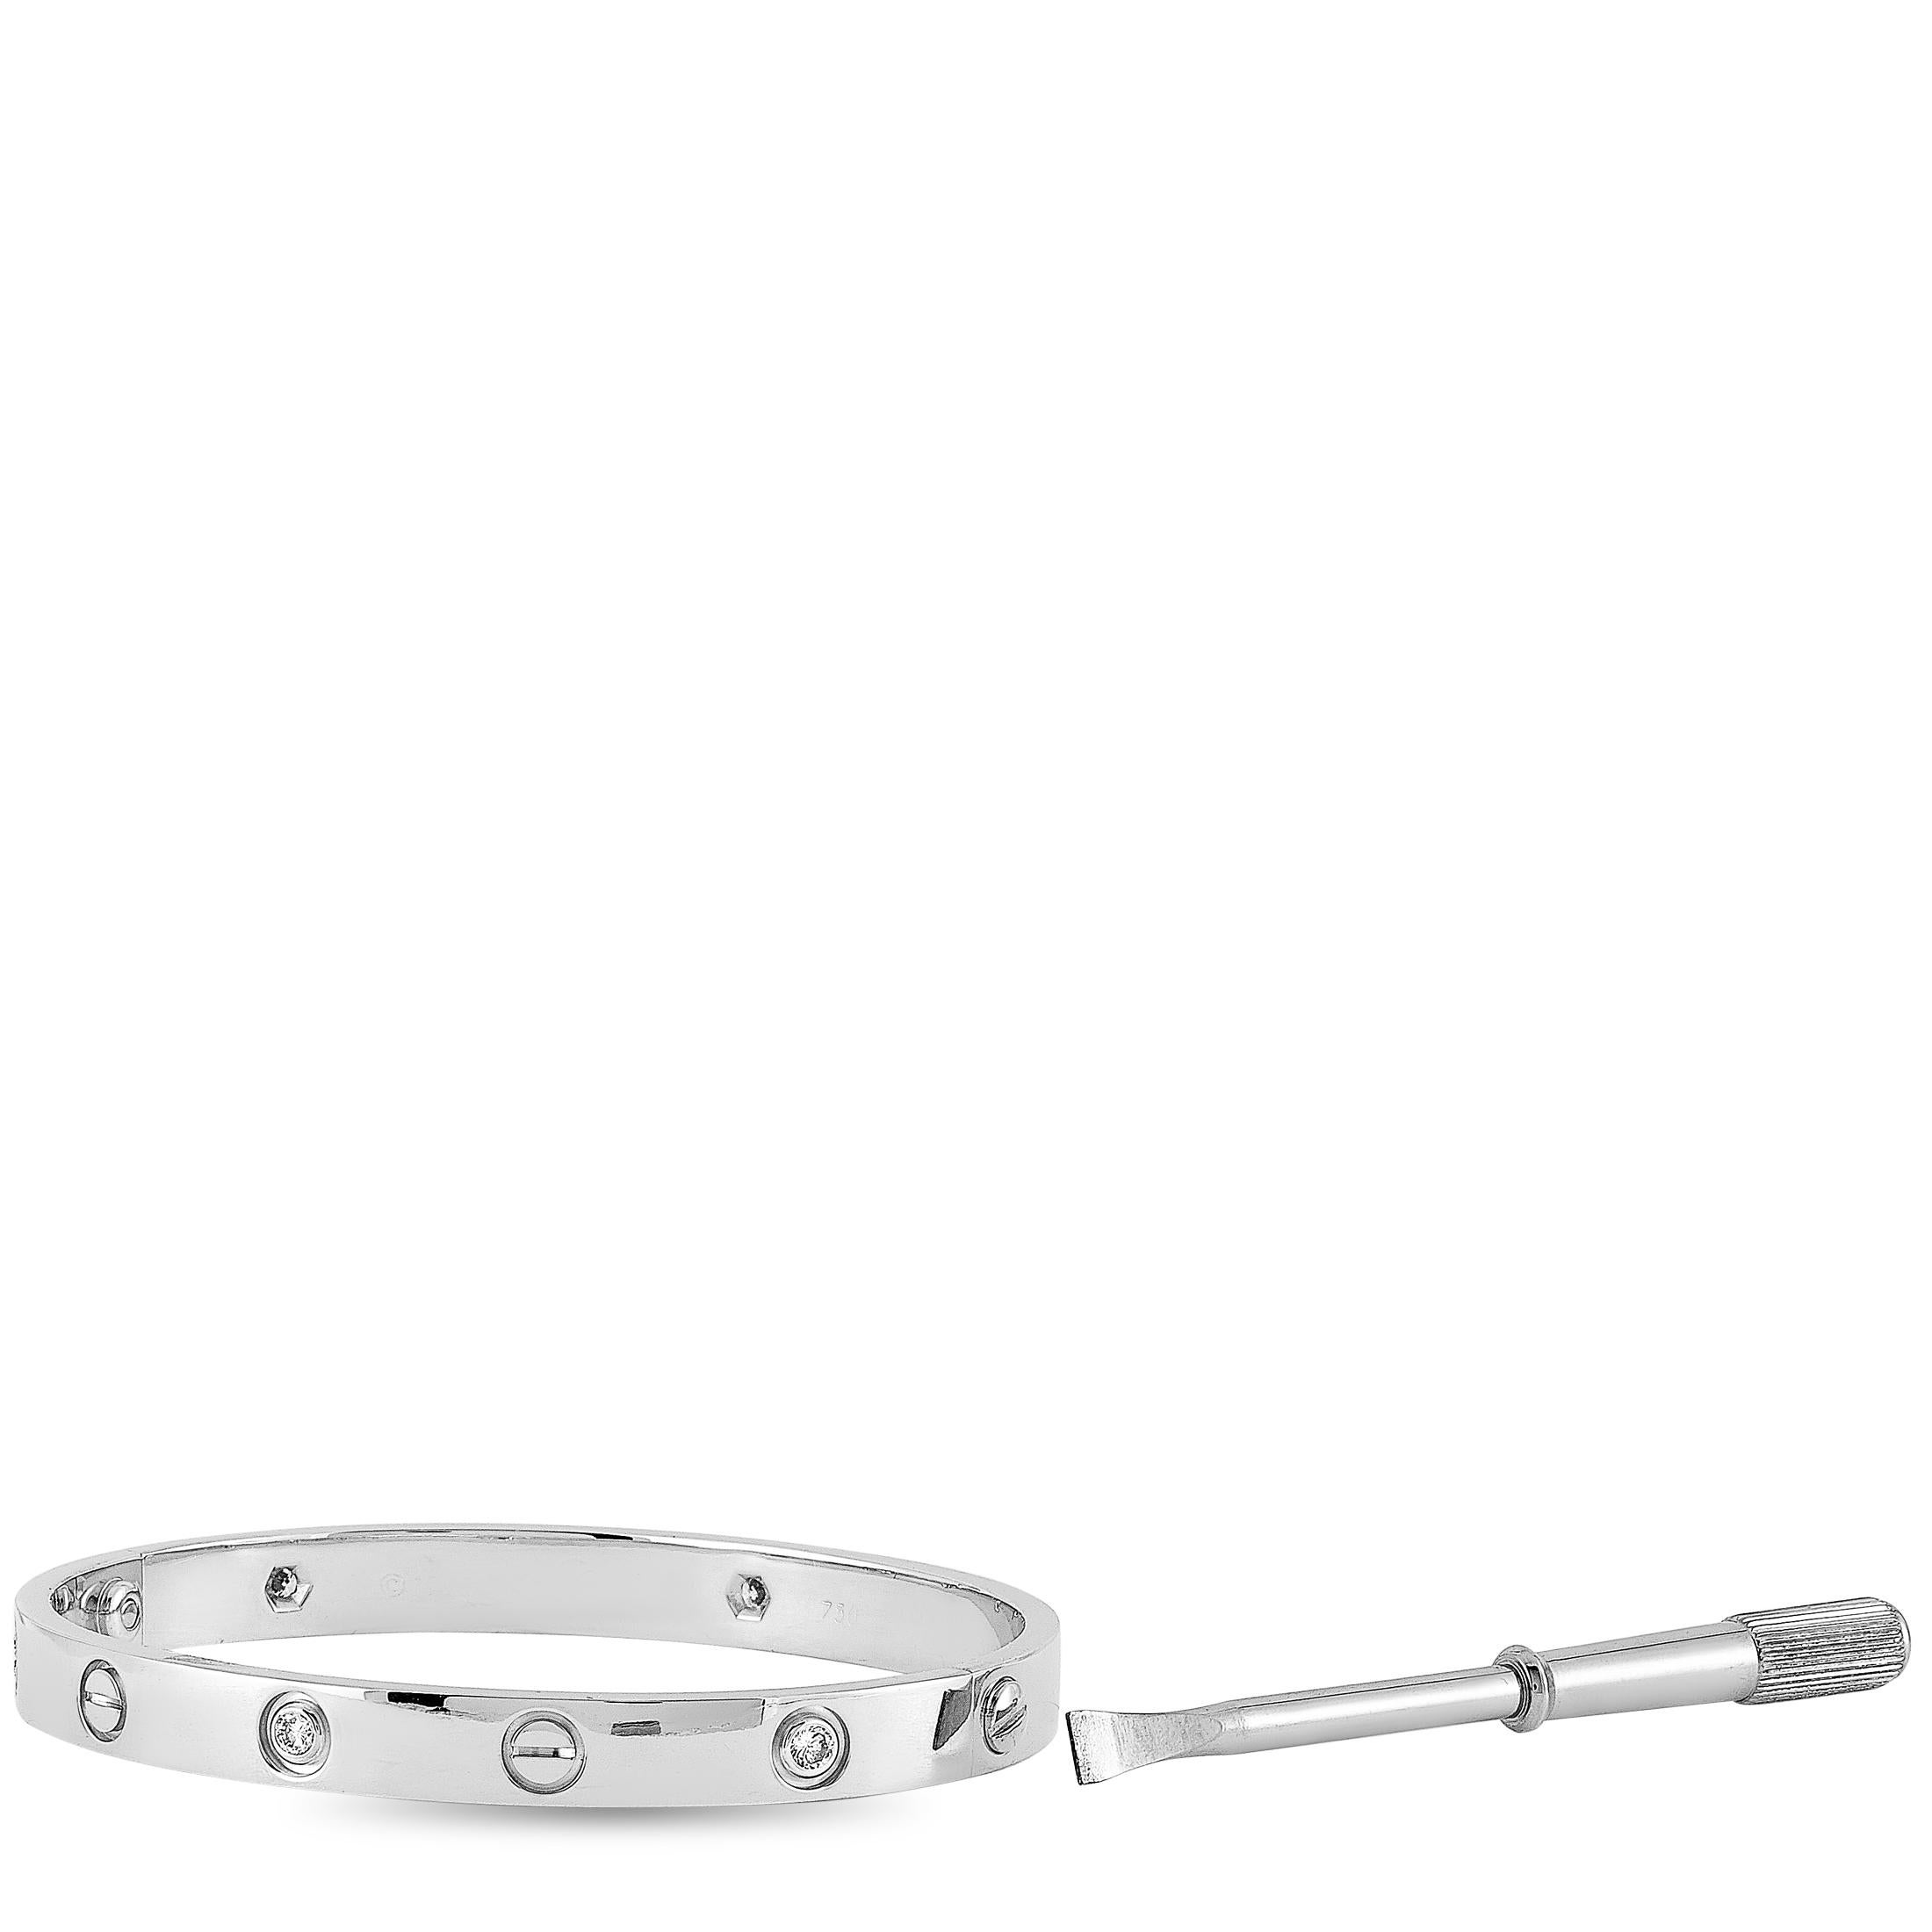 The Cartier “LOVE” bracelet is crafted from 18K white gold and set with six diamond stones that amount to 0.60 carats. The bracelet weighs 32.3 grams, measures 6.65” in length, and is delivered with a screwdriver.

This jewelry piece is offered in